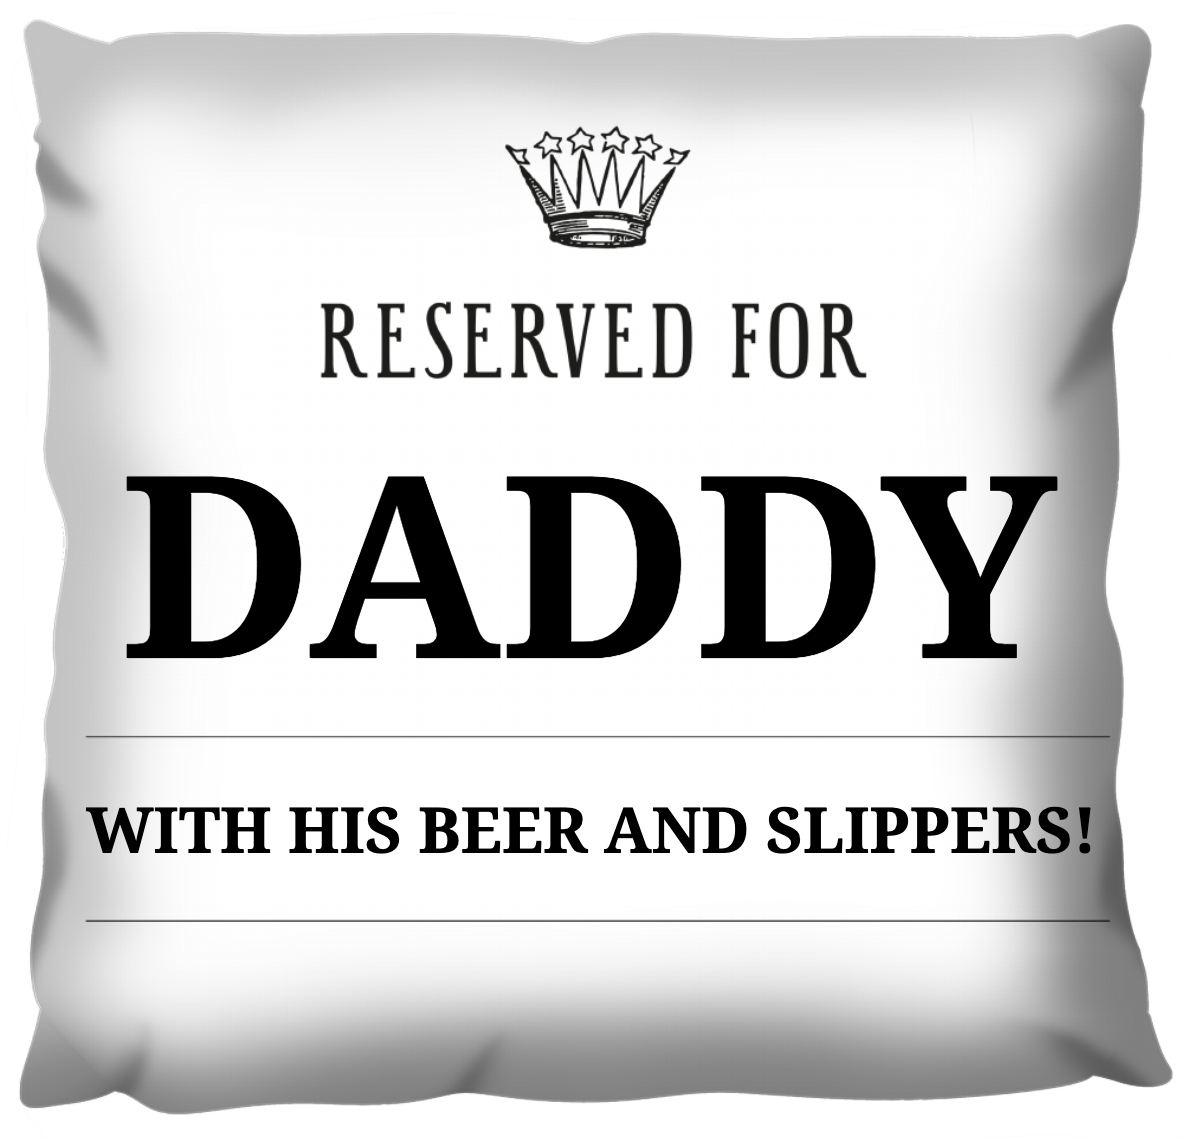 Reserved For Personalised Cushion - DADDY